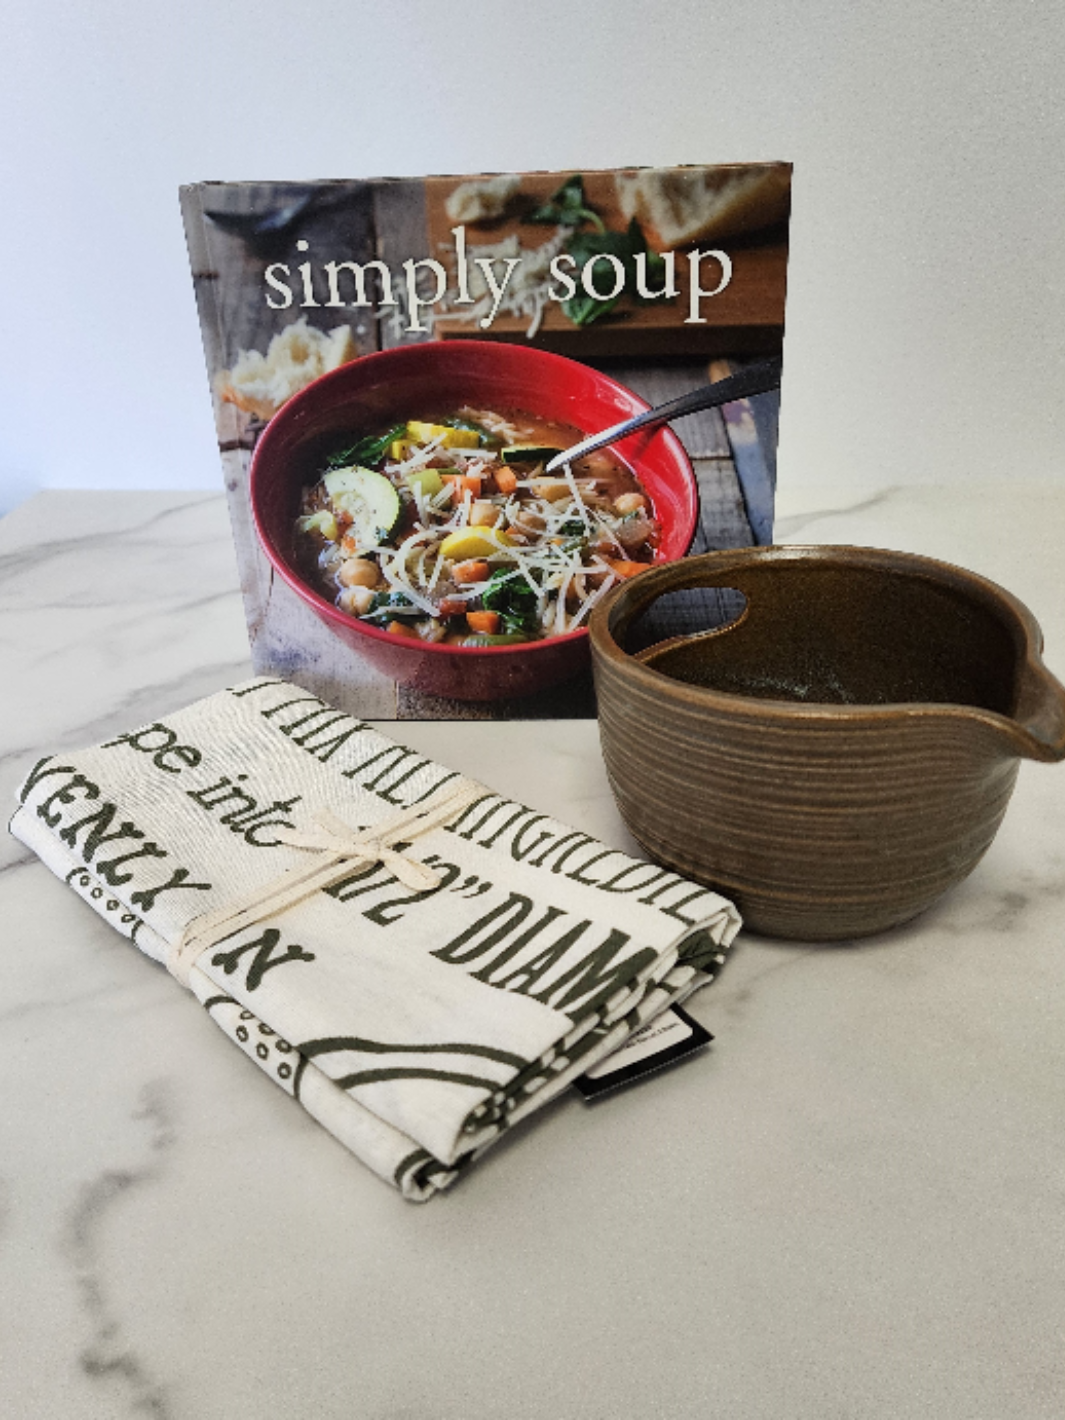 Simply soup cookbook, tea towels and stoneware bowl set